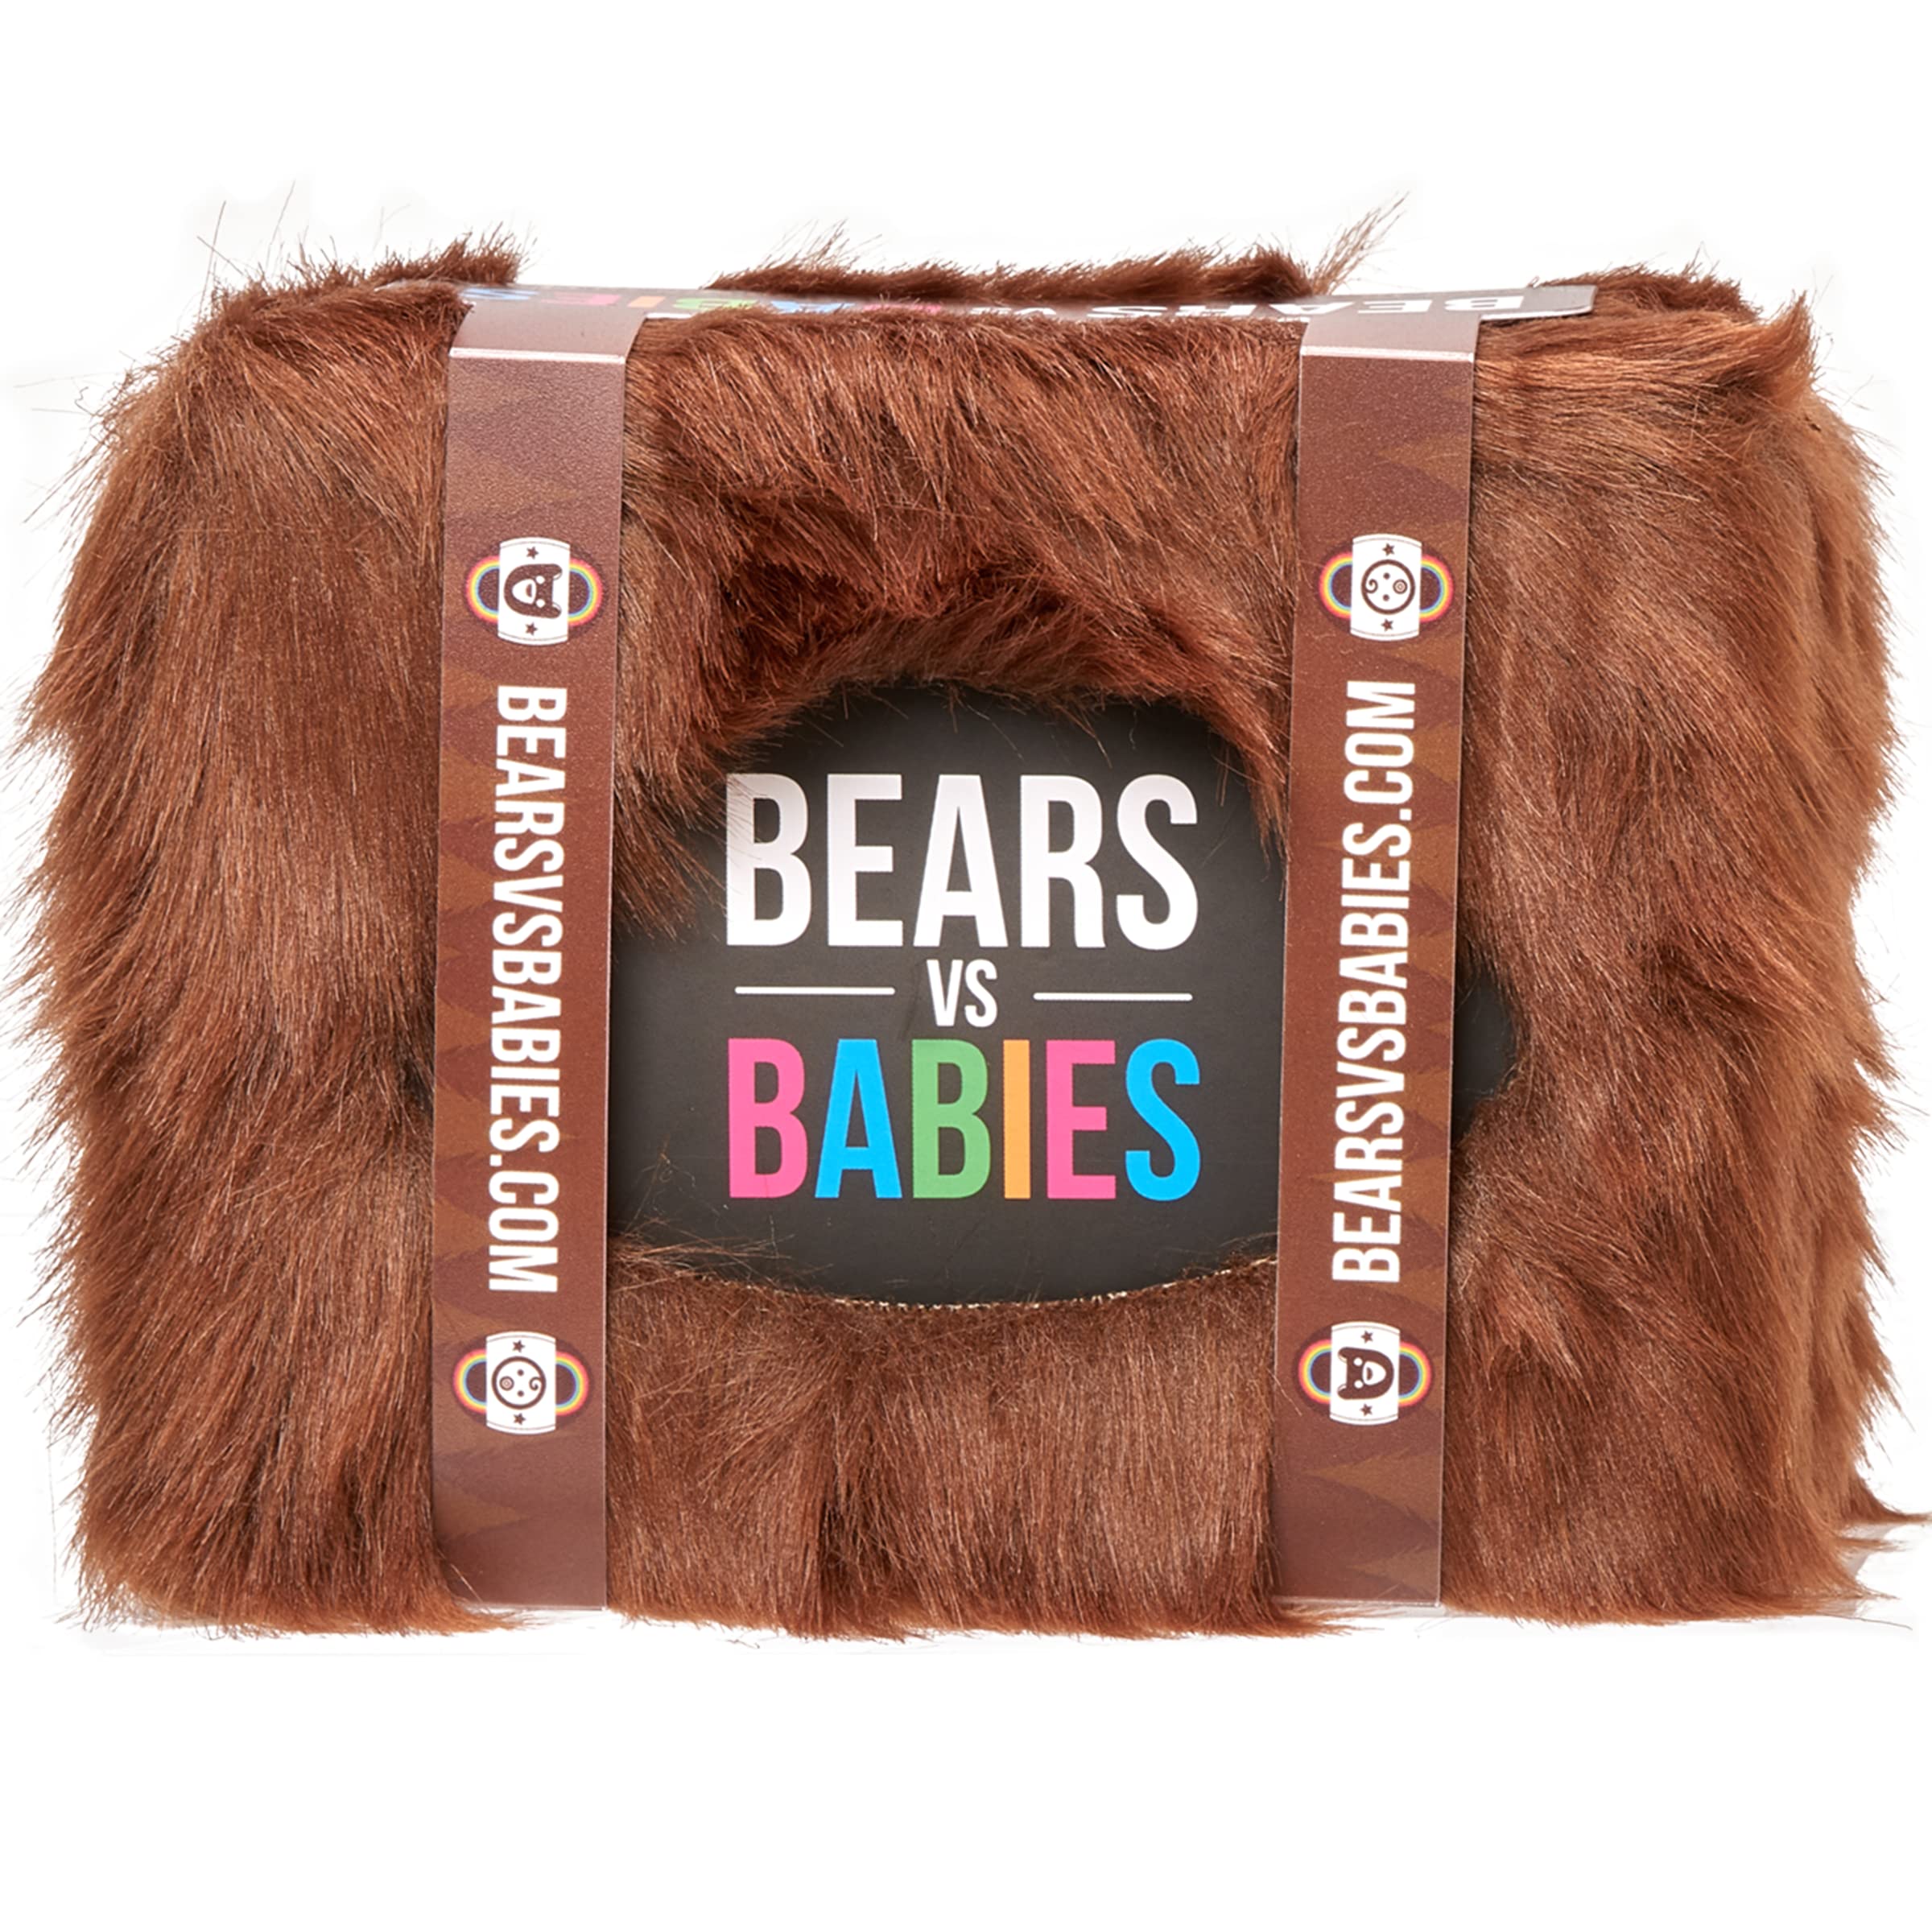 Bears vs Babies by Exploding Kittens - A Monster-Building- Family-Friendly Party Games - Card Games For Adults, Teens & Kids